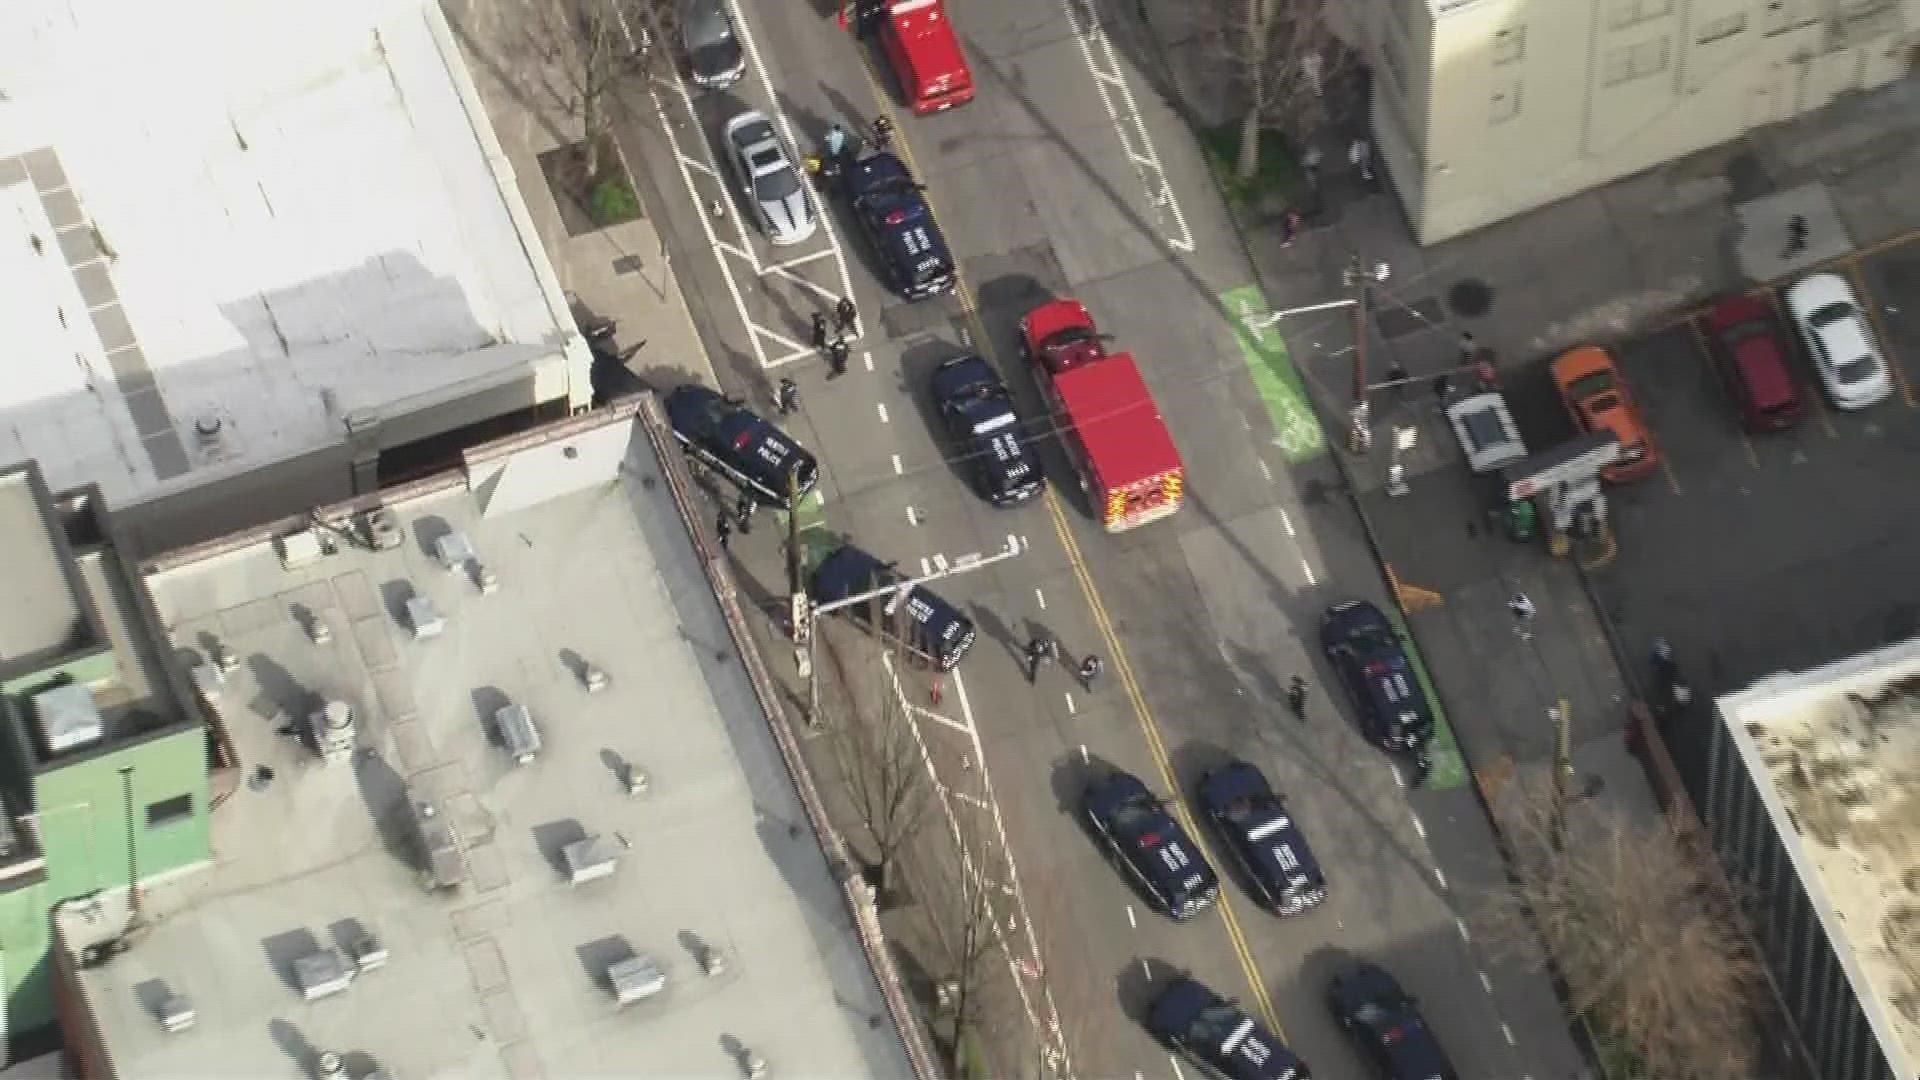 One person is in custody after a stabbing in downtown Seattle.